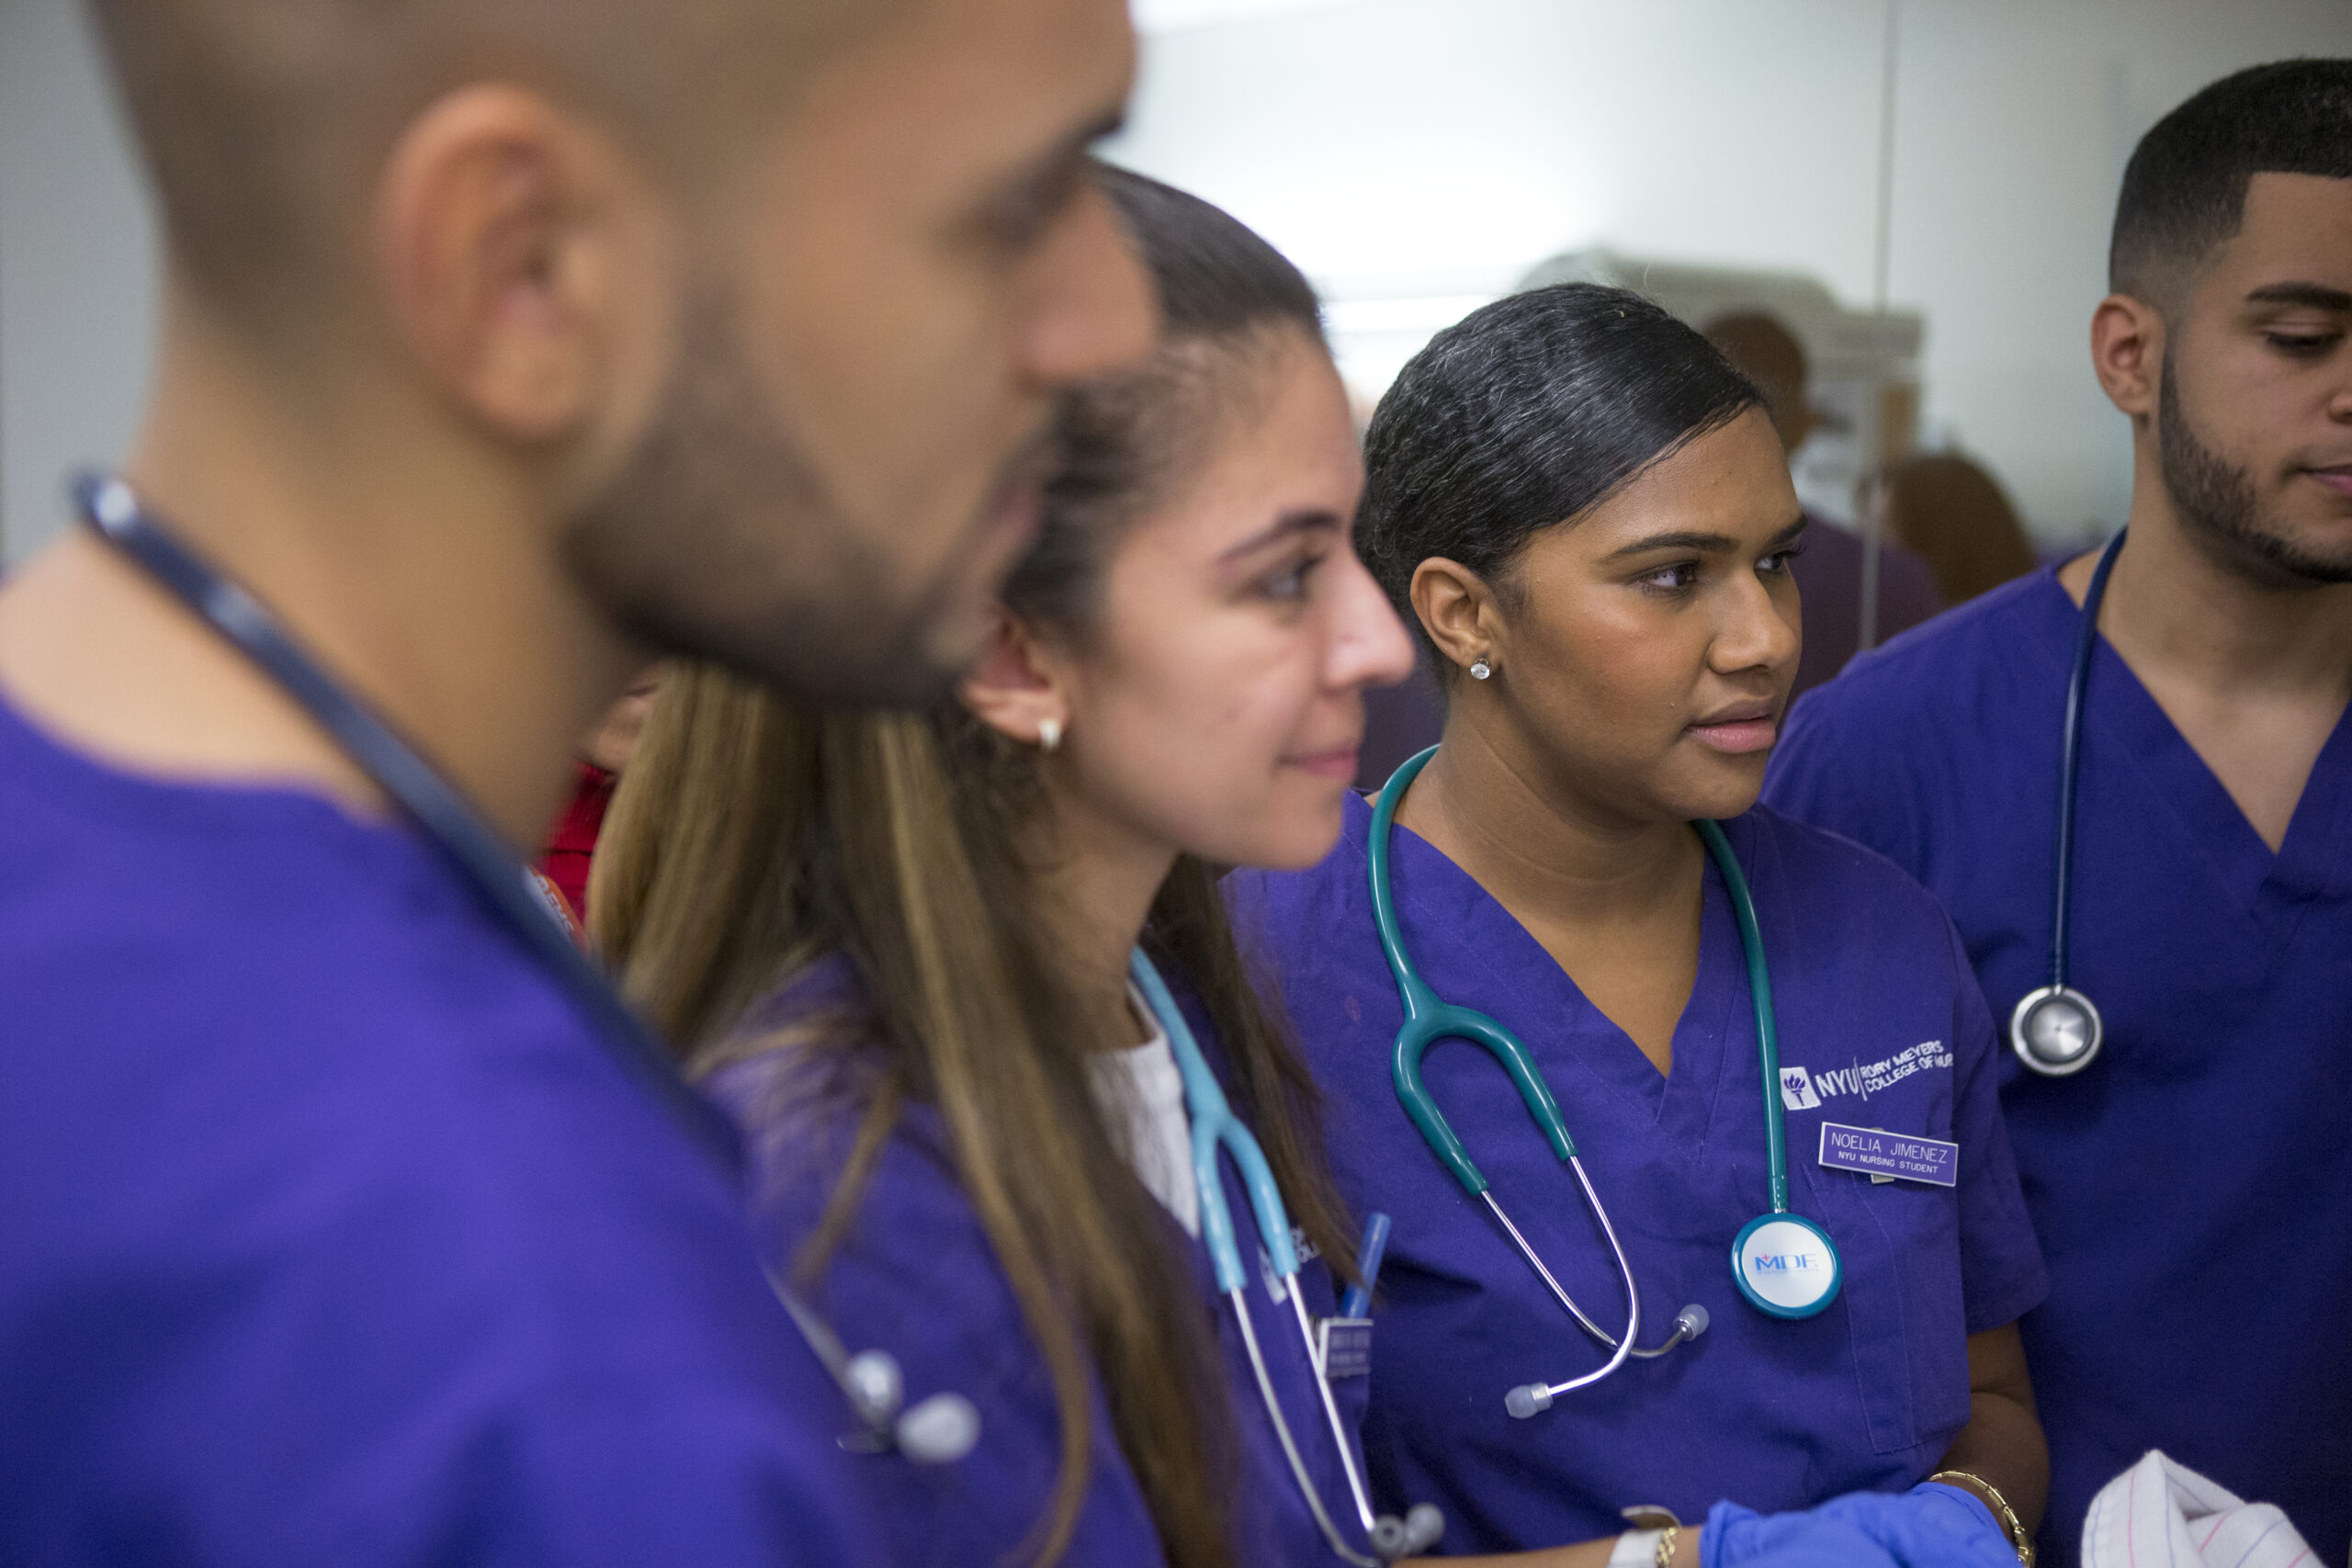 A group of students of color in purple nursing scrubs.